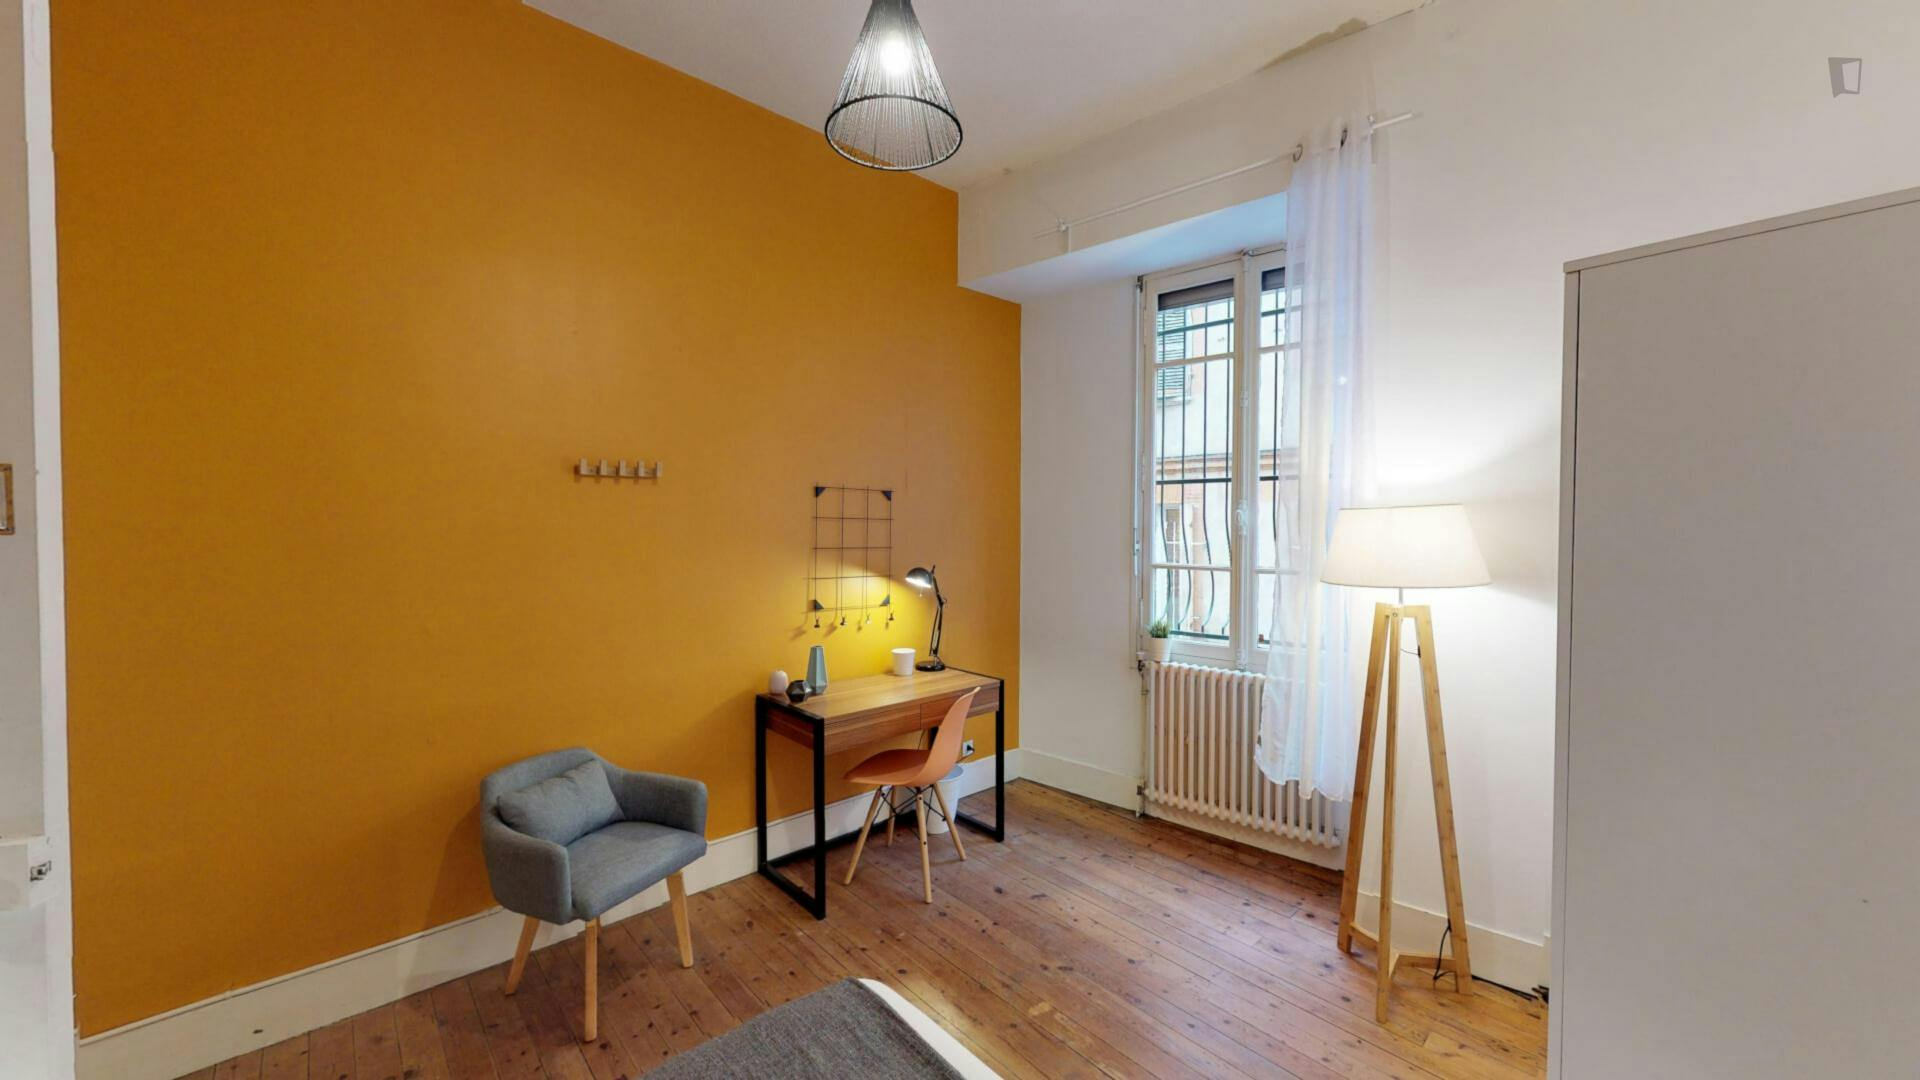 Charming double bedroom in a student flat, in the centre of Toulouse